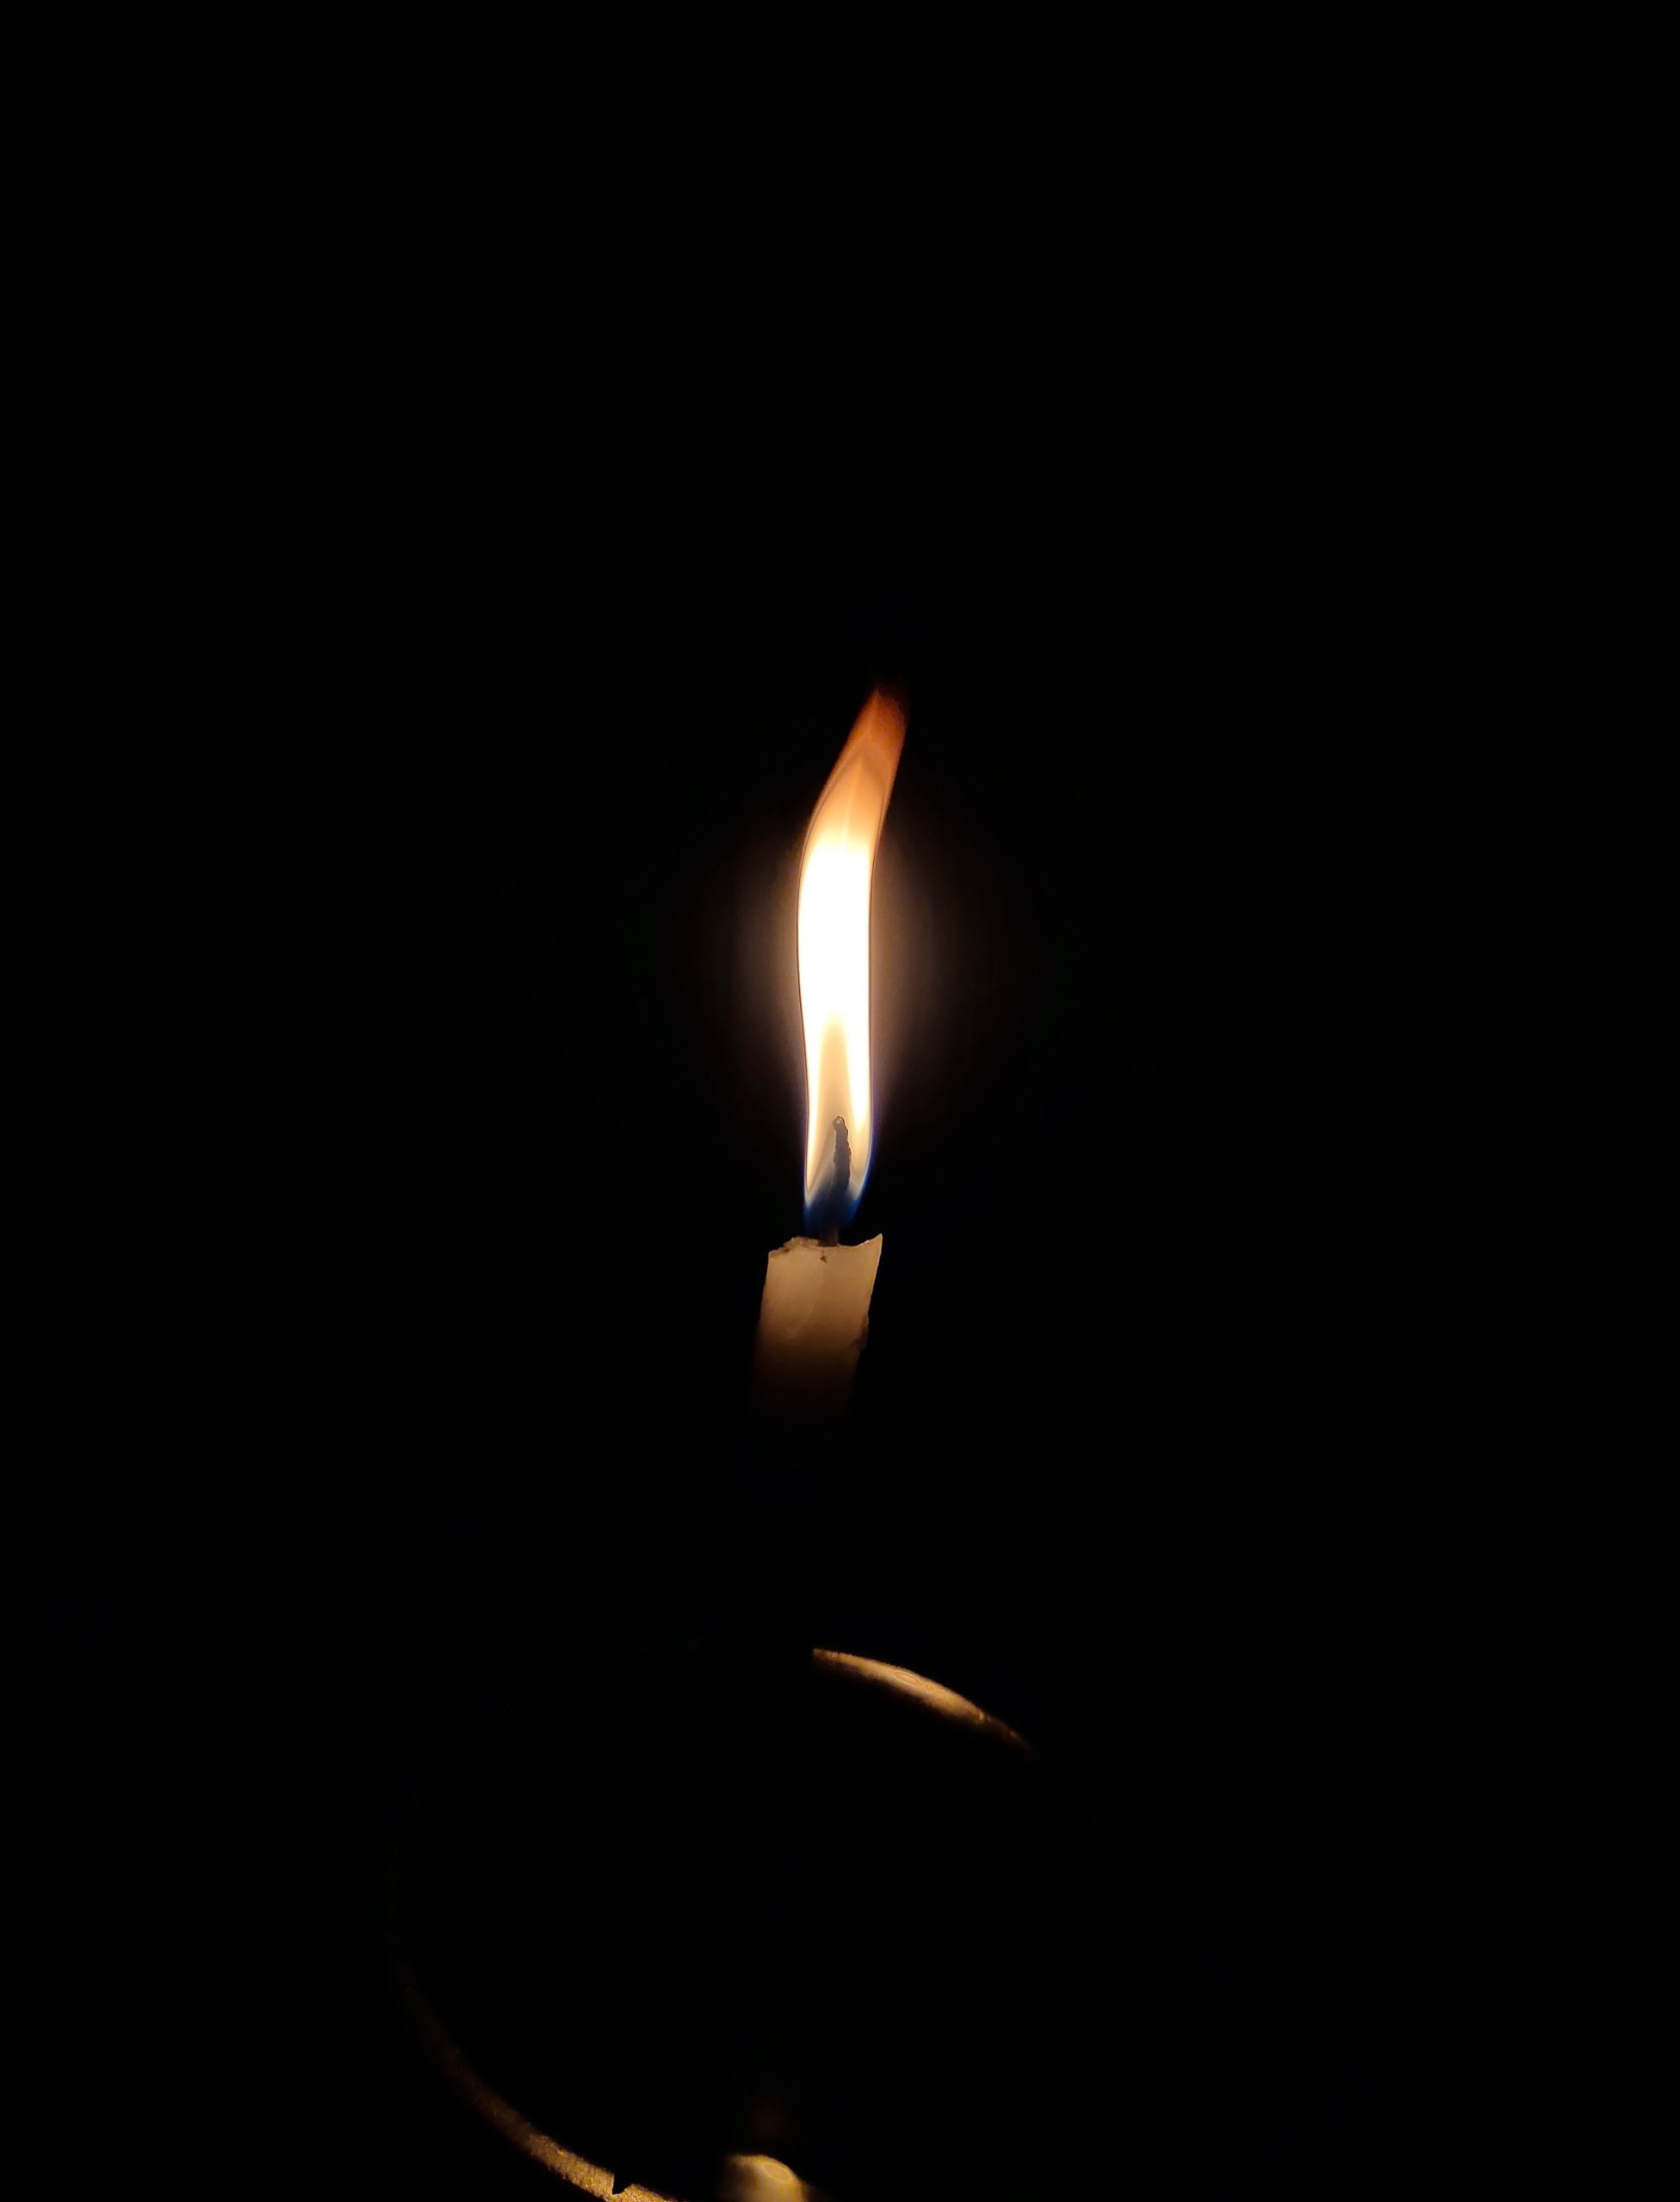 Candle Flame in the Dark on Focus